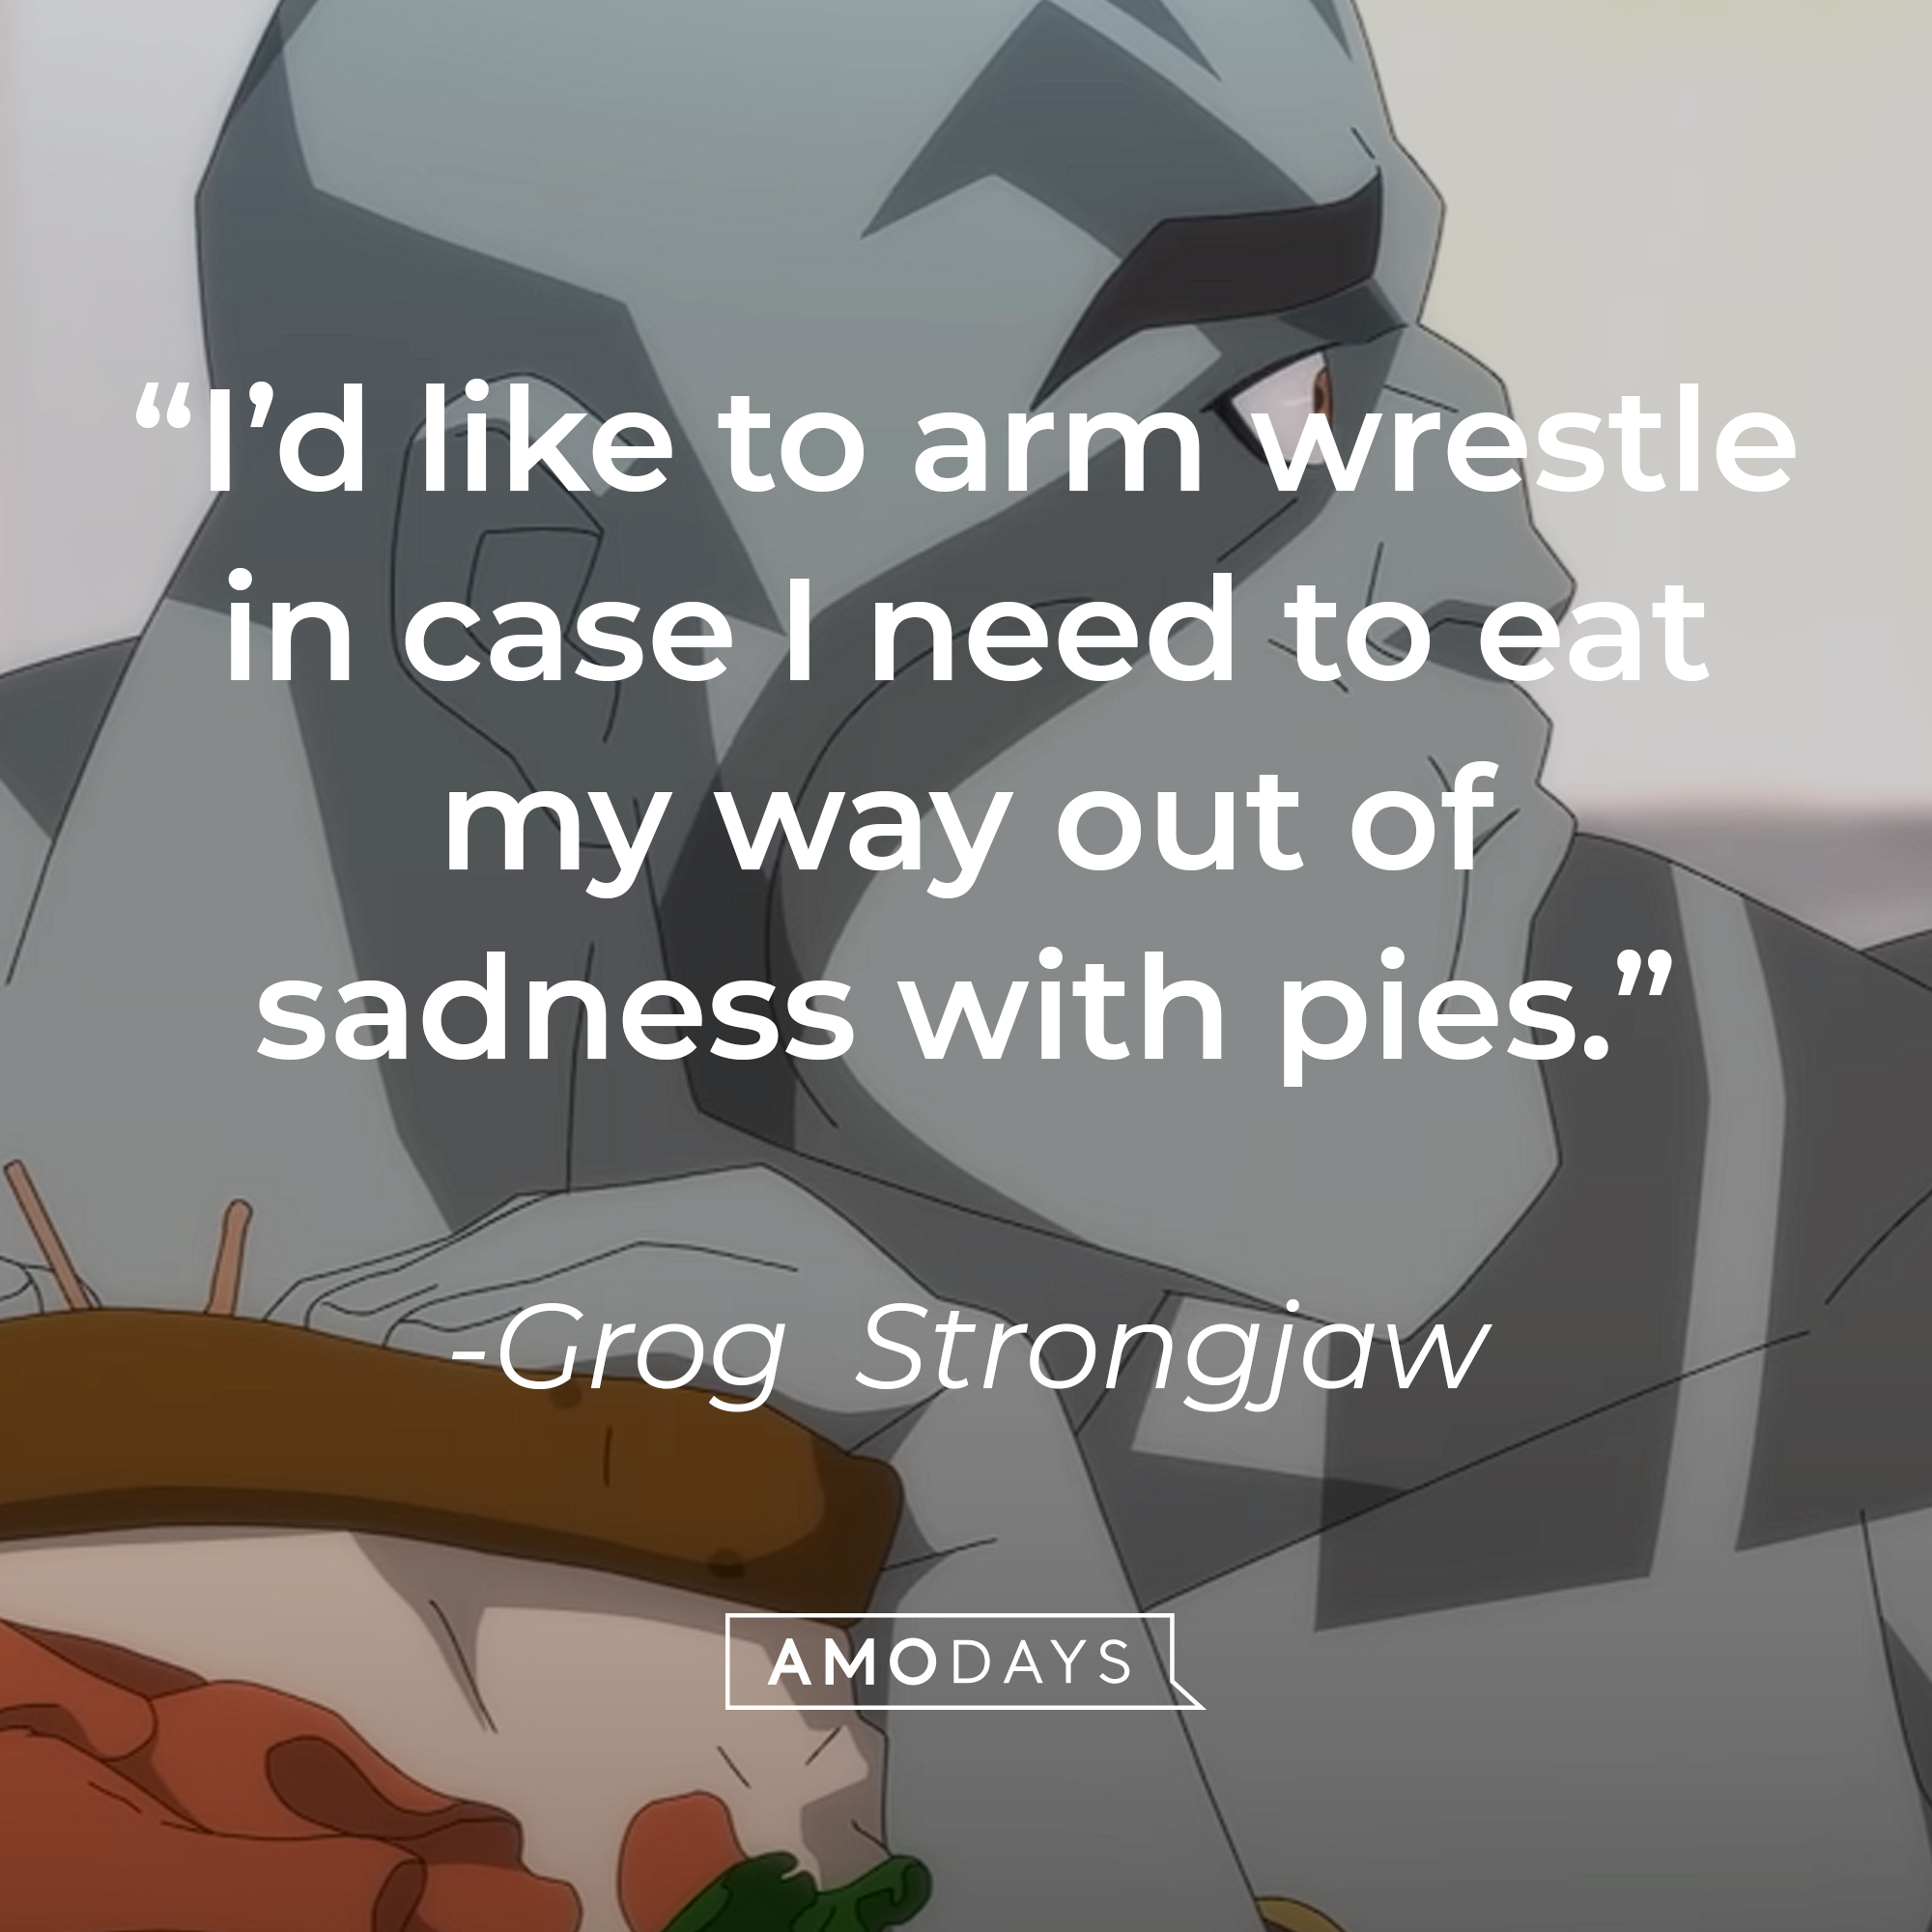 An image of Scanlan Shorthalt with her quote:m “I’d like to arm wrestle in case I need to eat my way out of sadness with pies.” | Source: youtube.com/PrimeVideo